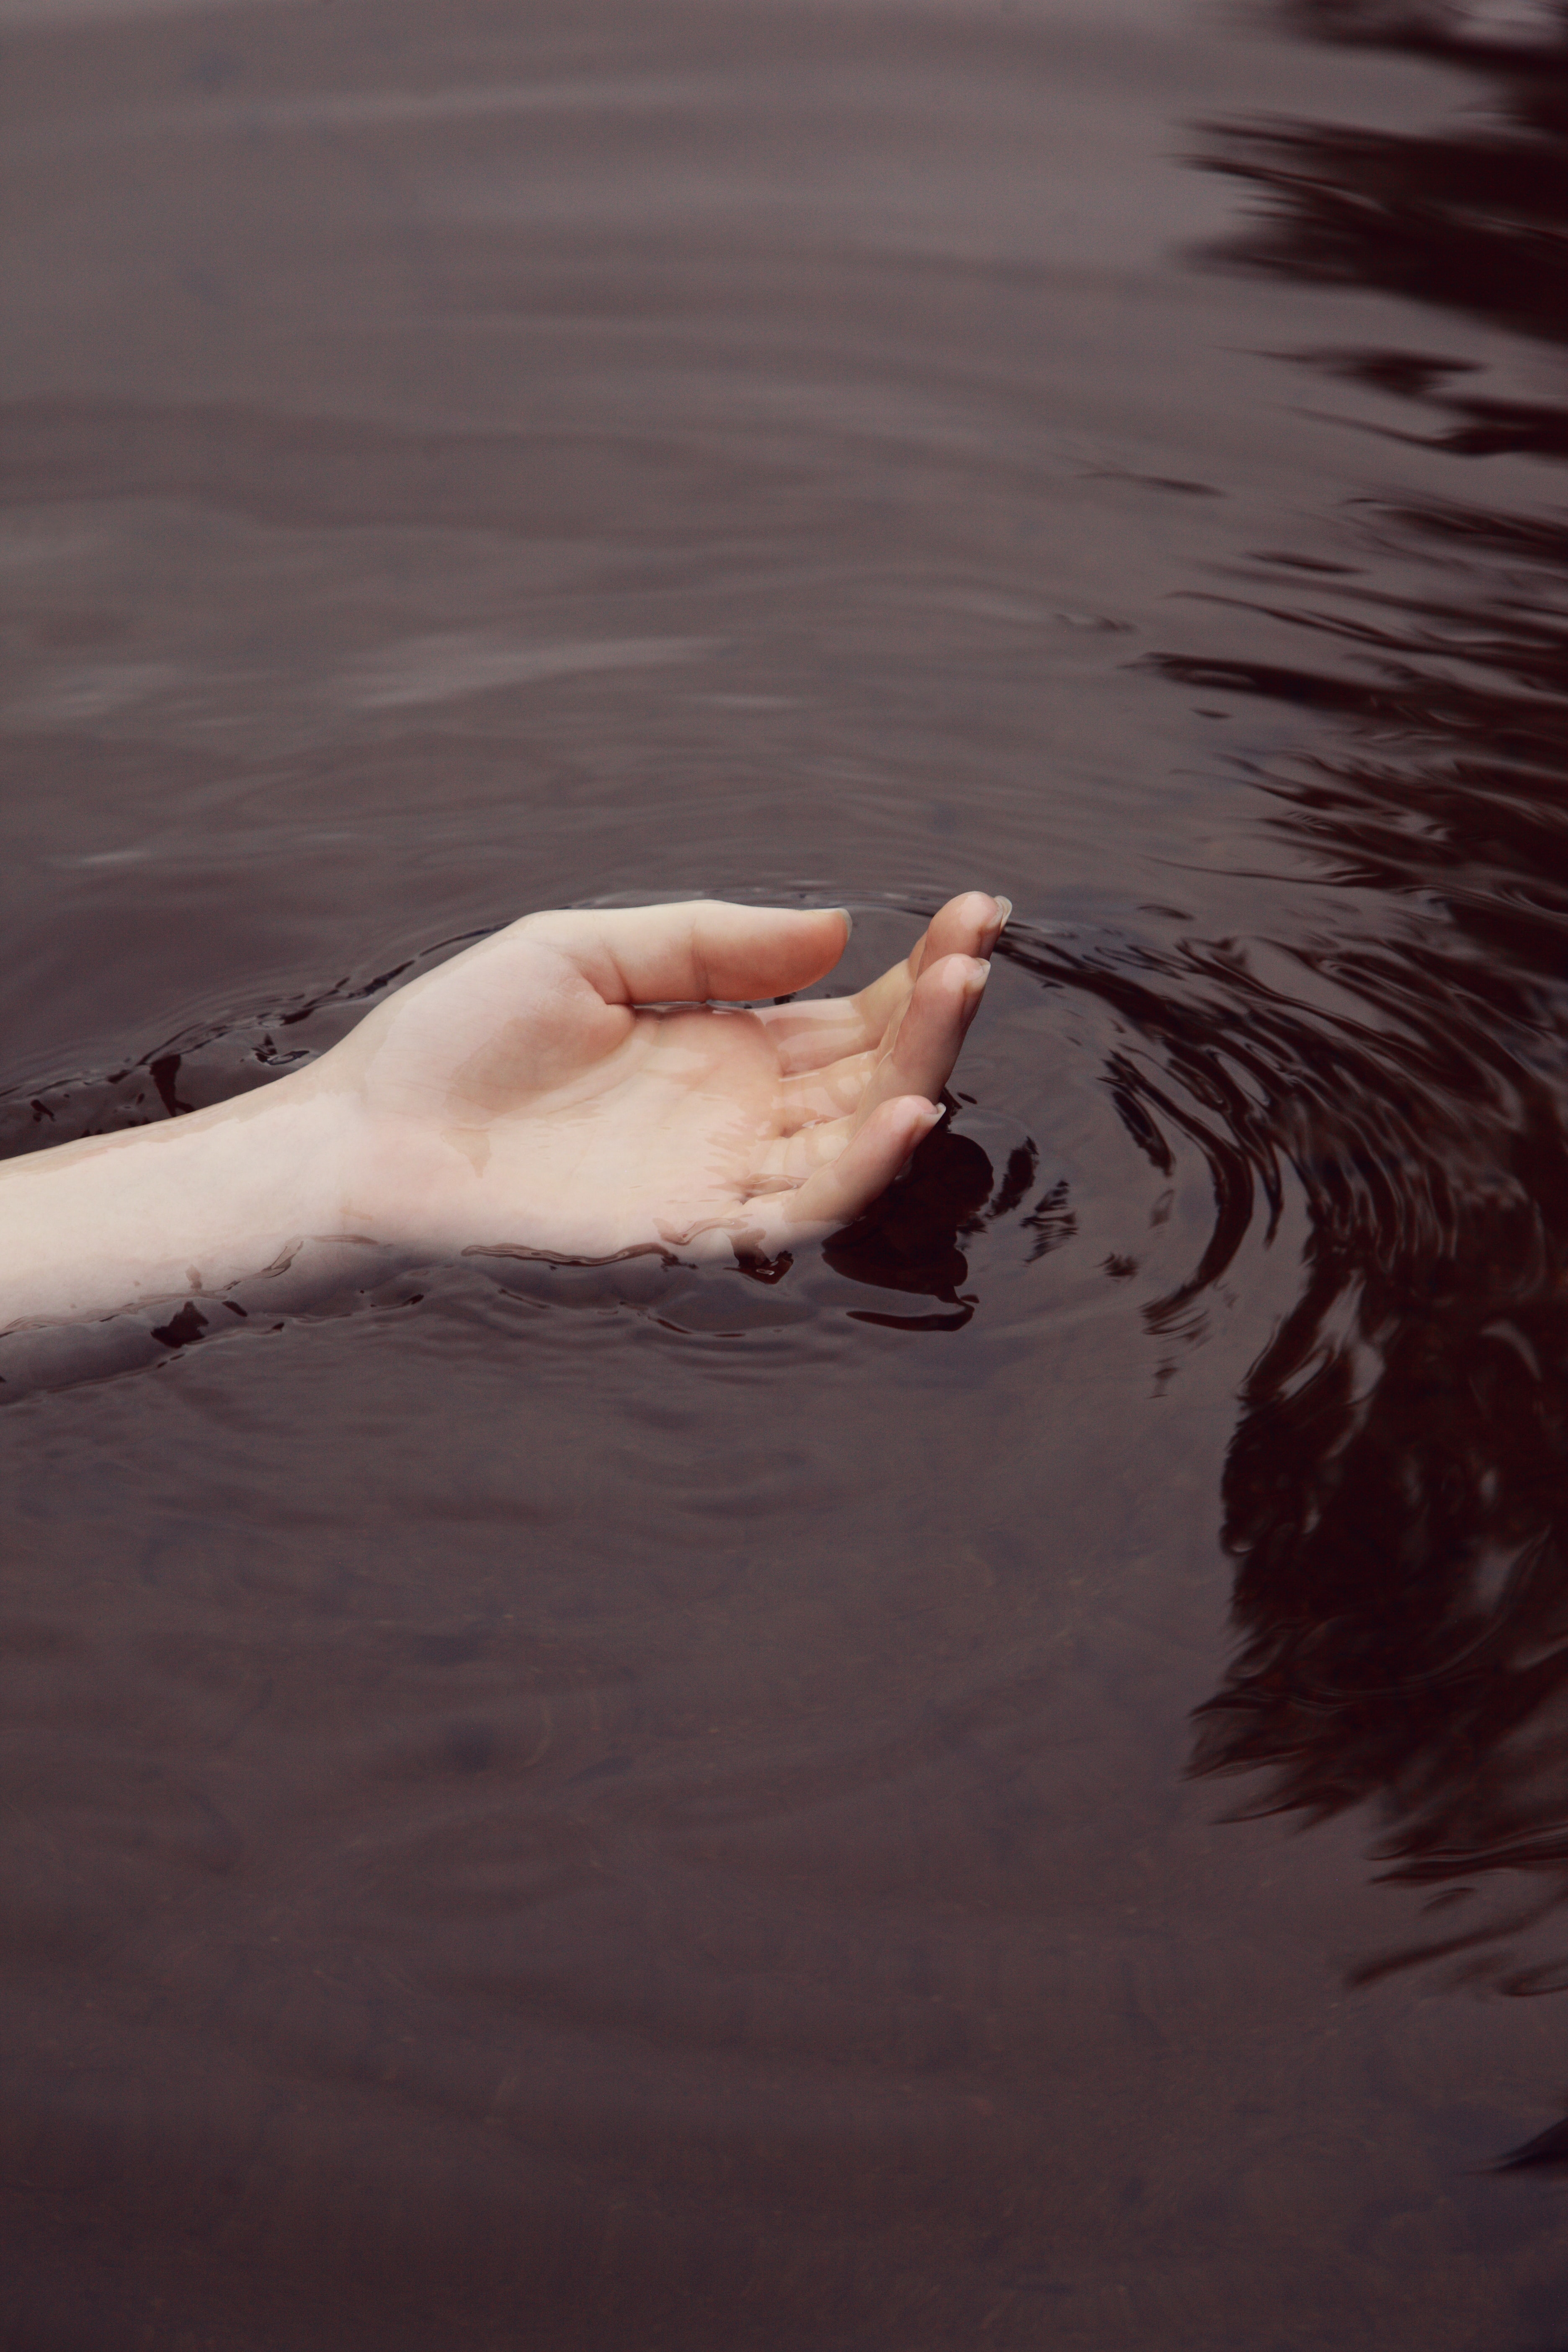 water, hand, miscellanea, miscellaneous, ripples, ripple, wavy, fingers